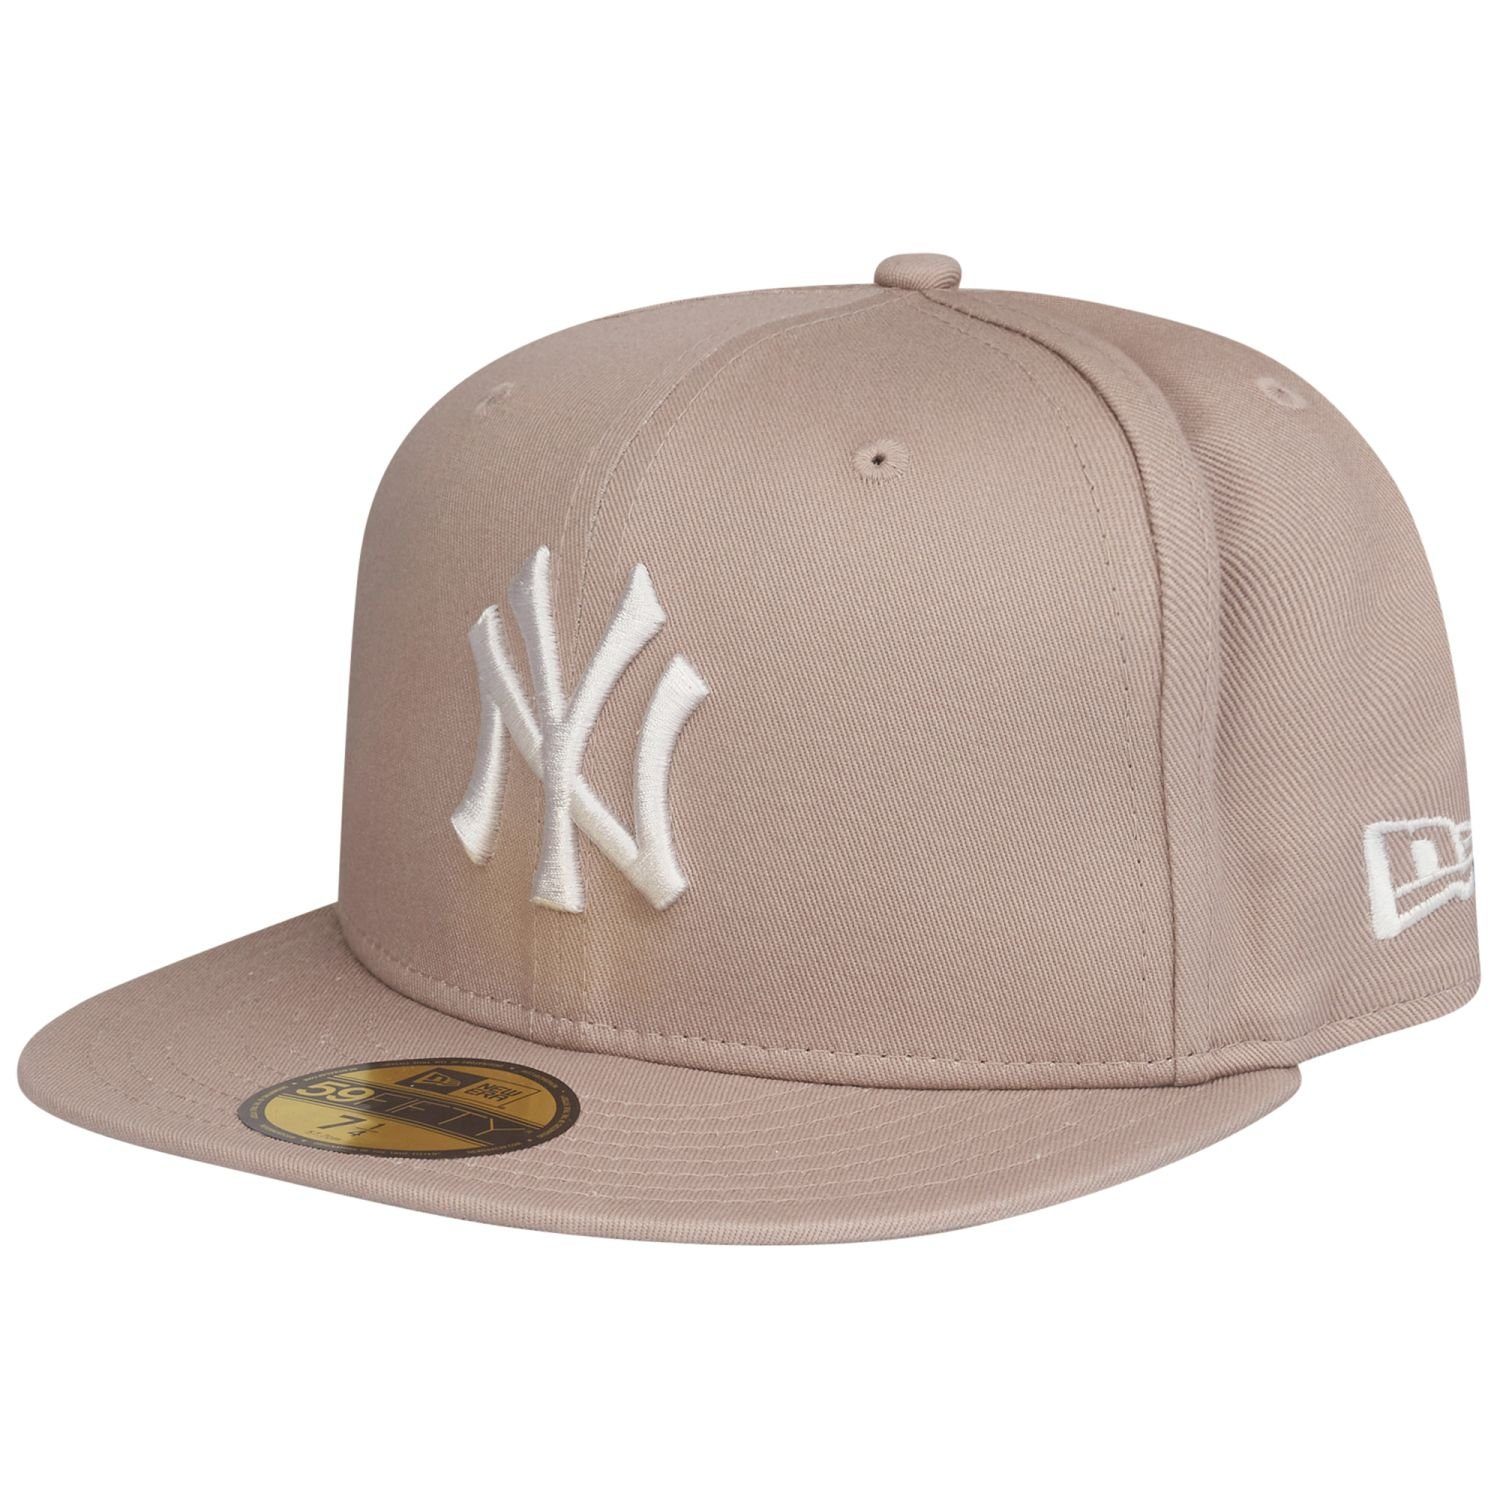 Era New New Yankees 59Fifty Fitted Cap ash York brown